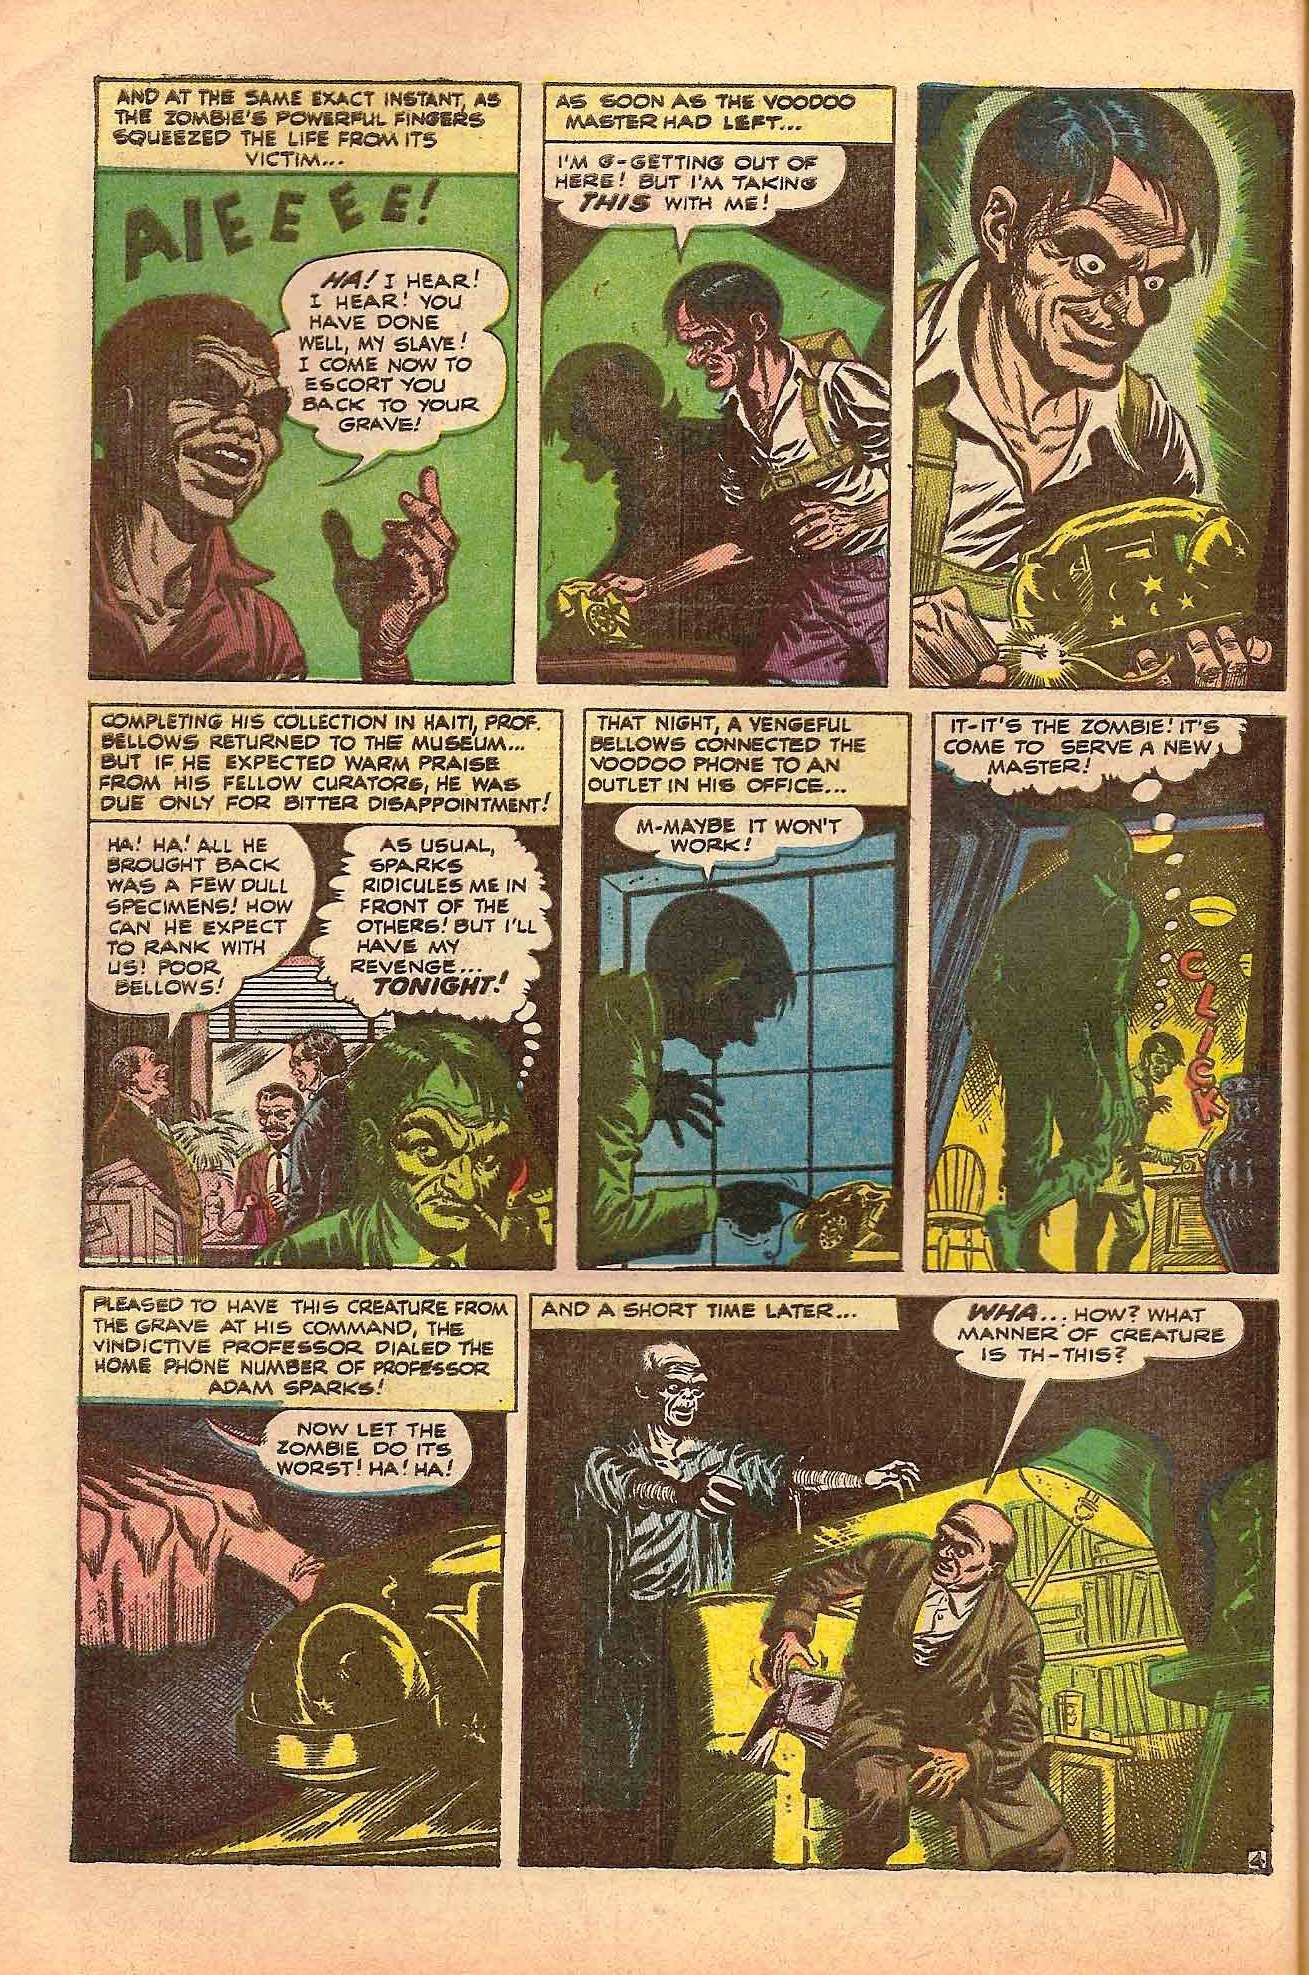 Marvel Tales (1949) 114 Page 4